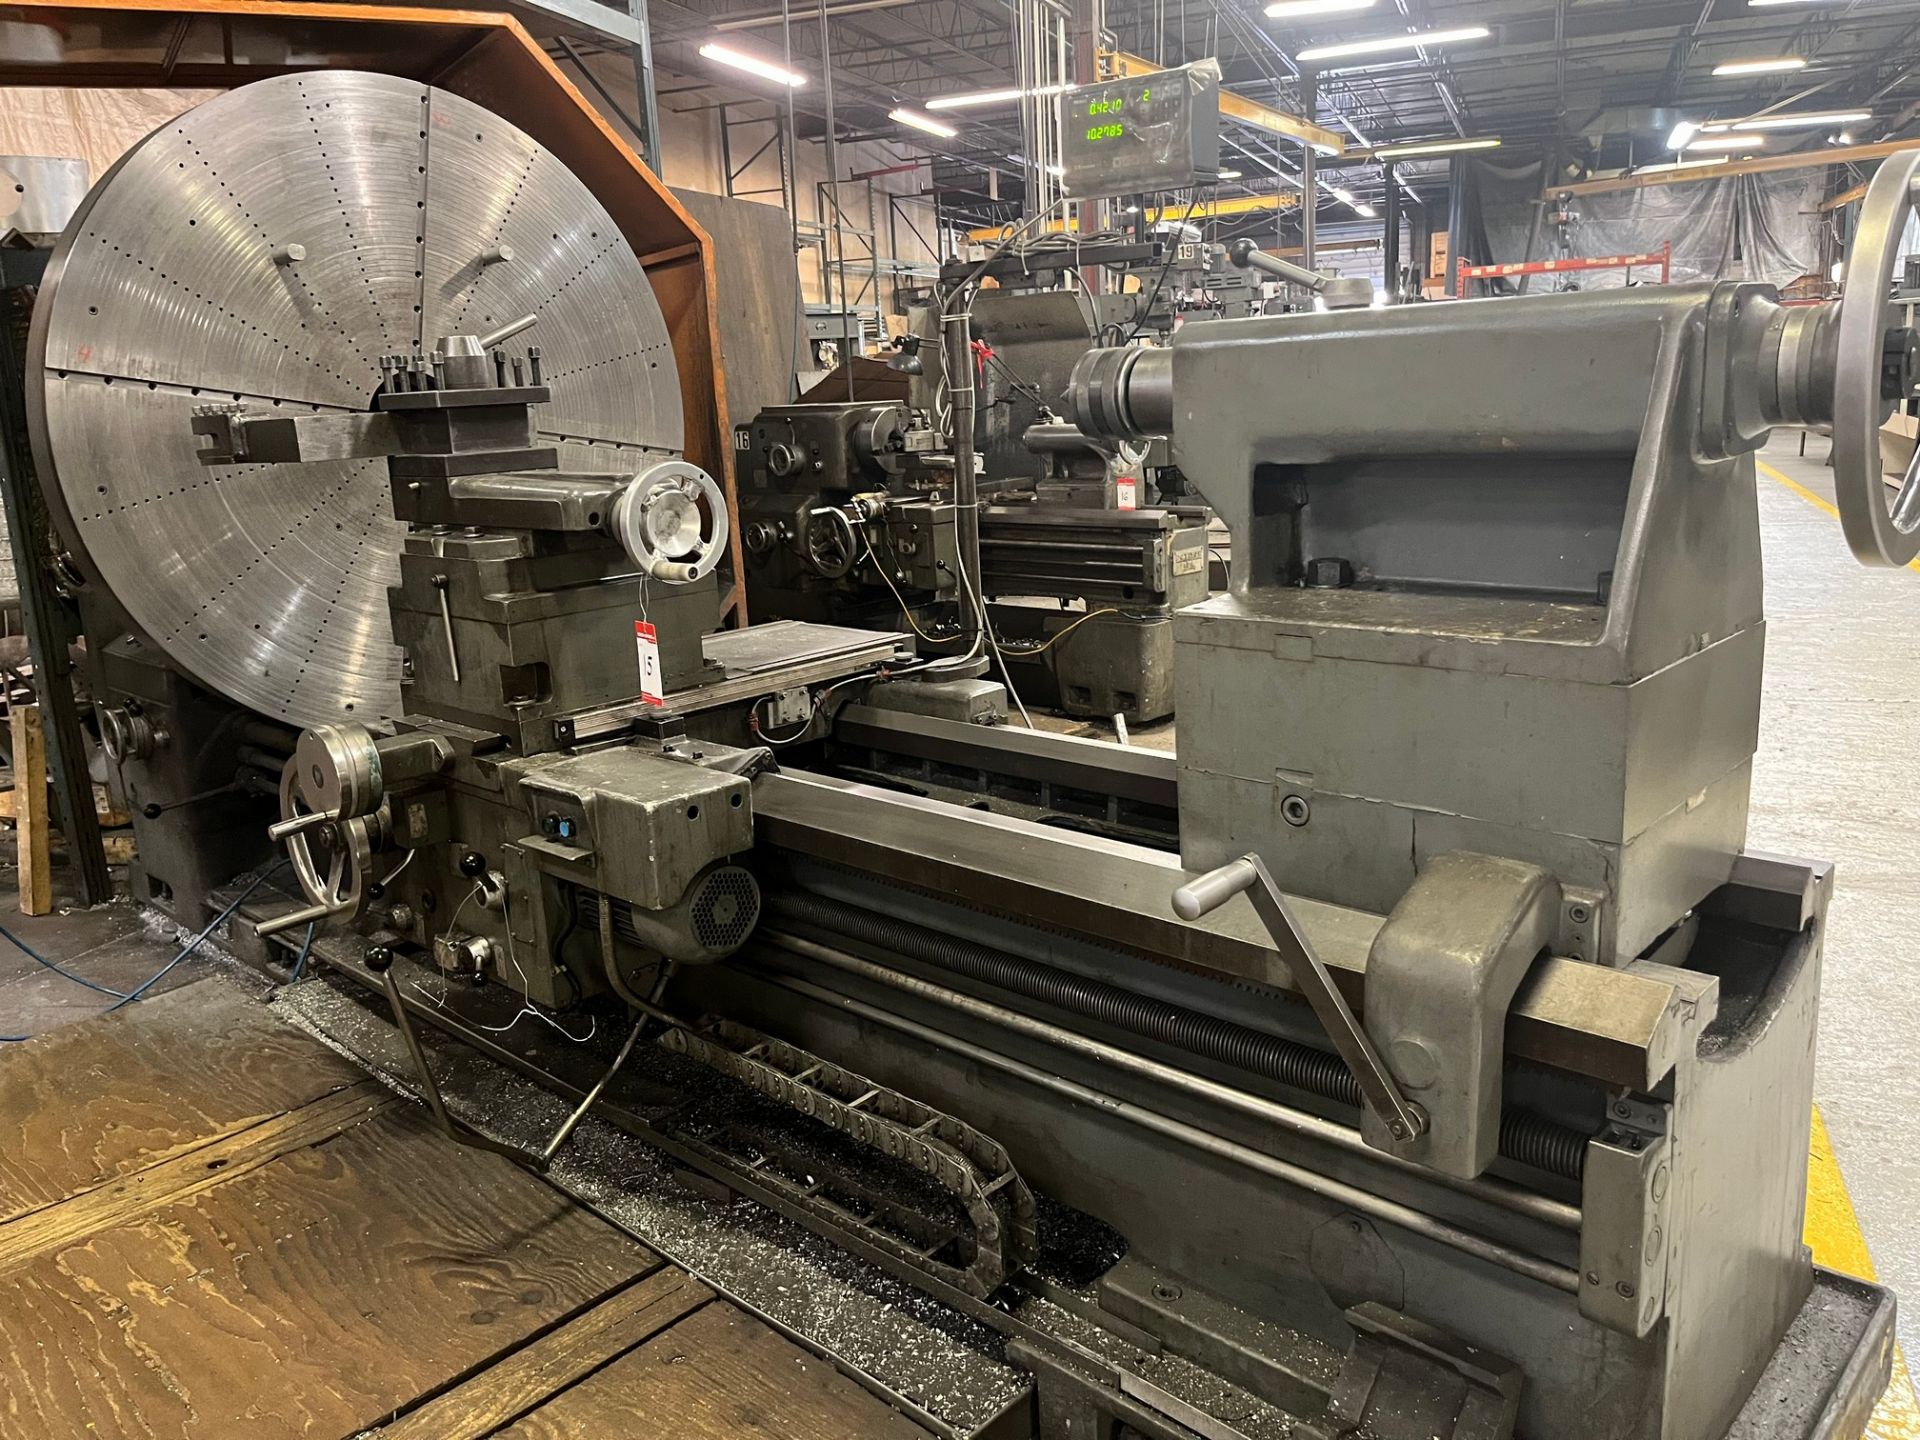 SIRCO PA-36 GAP BED ENGINE LATHE, MITUTOYO 2-AXIS DRO, 36” SWING OVER BED, 60” SWING OVER GAP, 80”